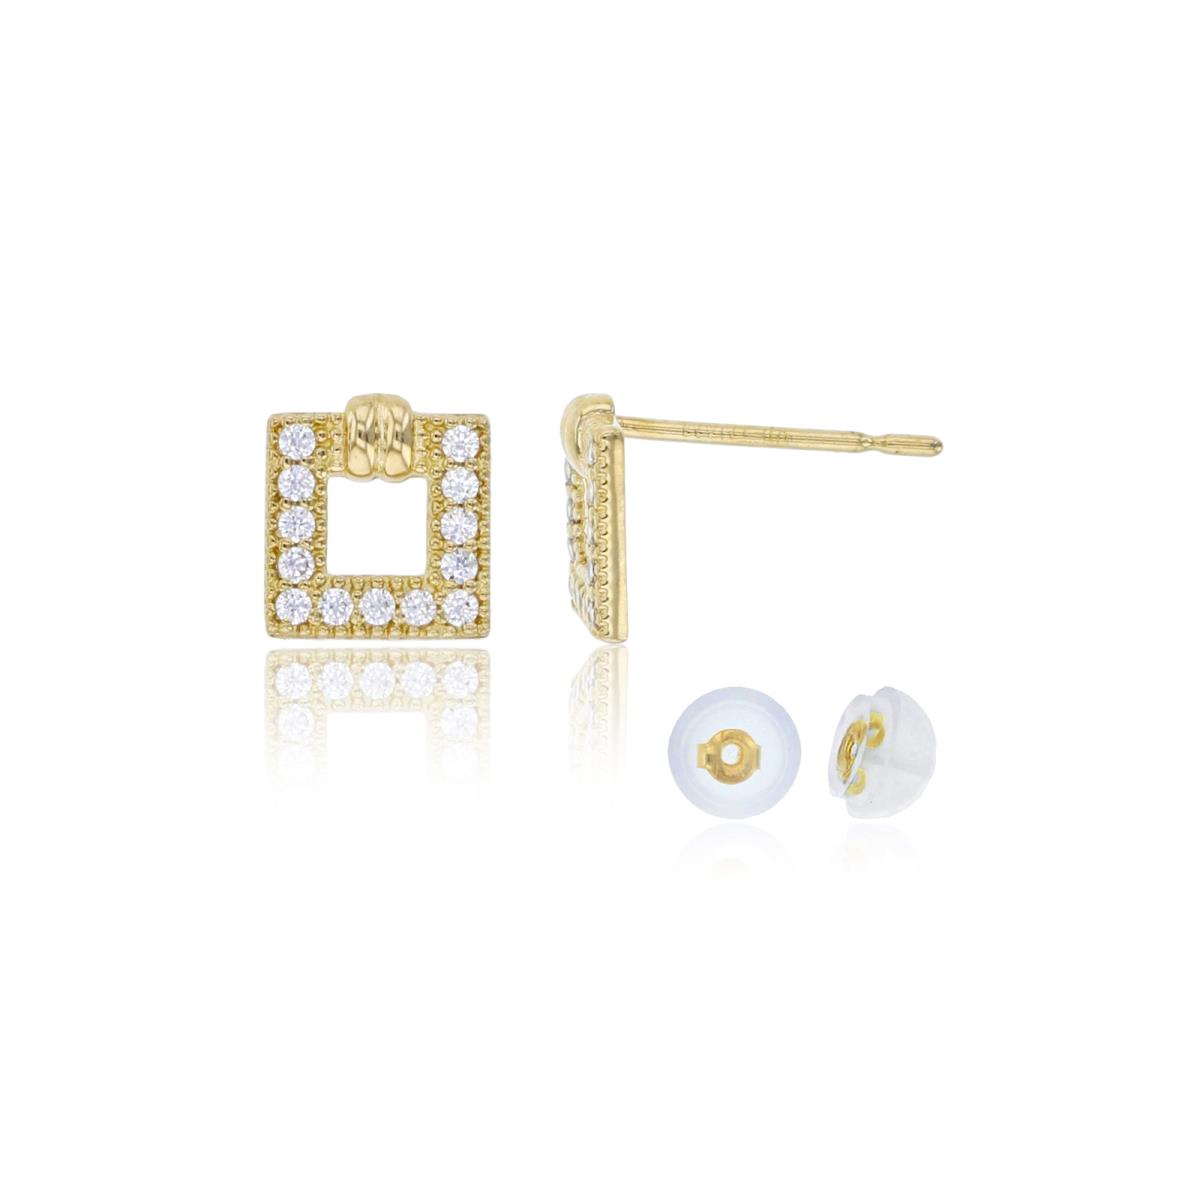 14K Yellow Gold 6x6mm Paved CZ Open Square Stud Earring with Silicone Back